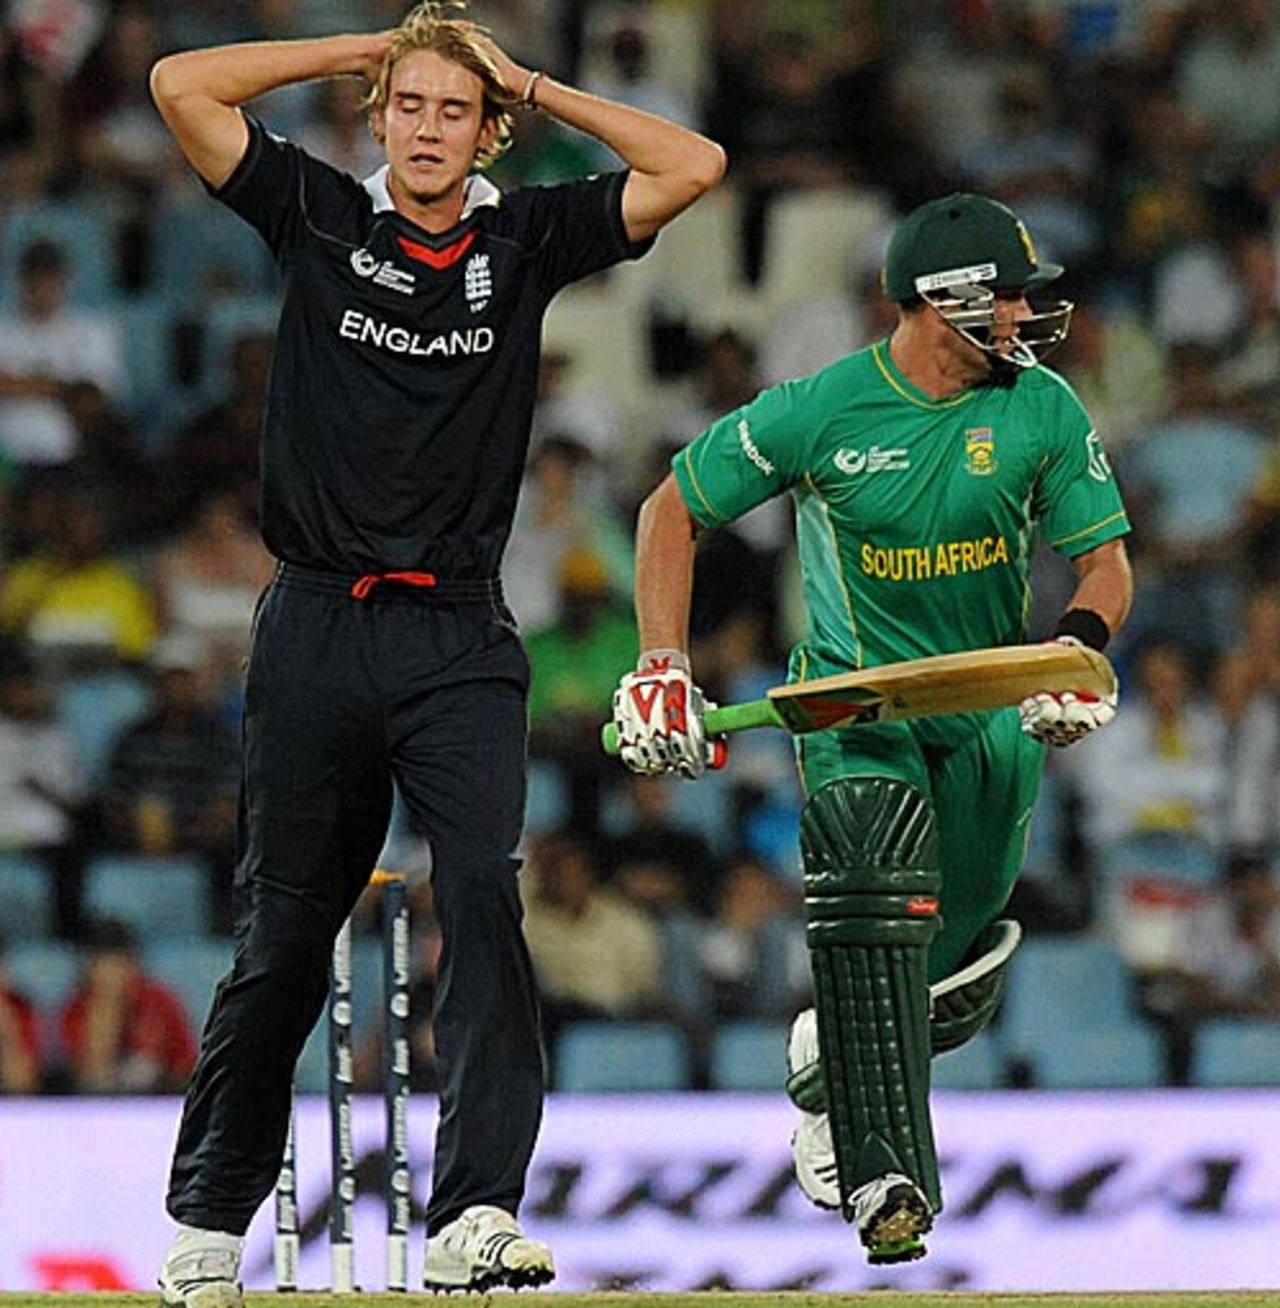 The frustration didn't last long, as Stuart Broad eventually got rid of Jacques Kallis, South Africa v England, ICC Champions Trophy, Group B, Centurion, September 27, 2009